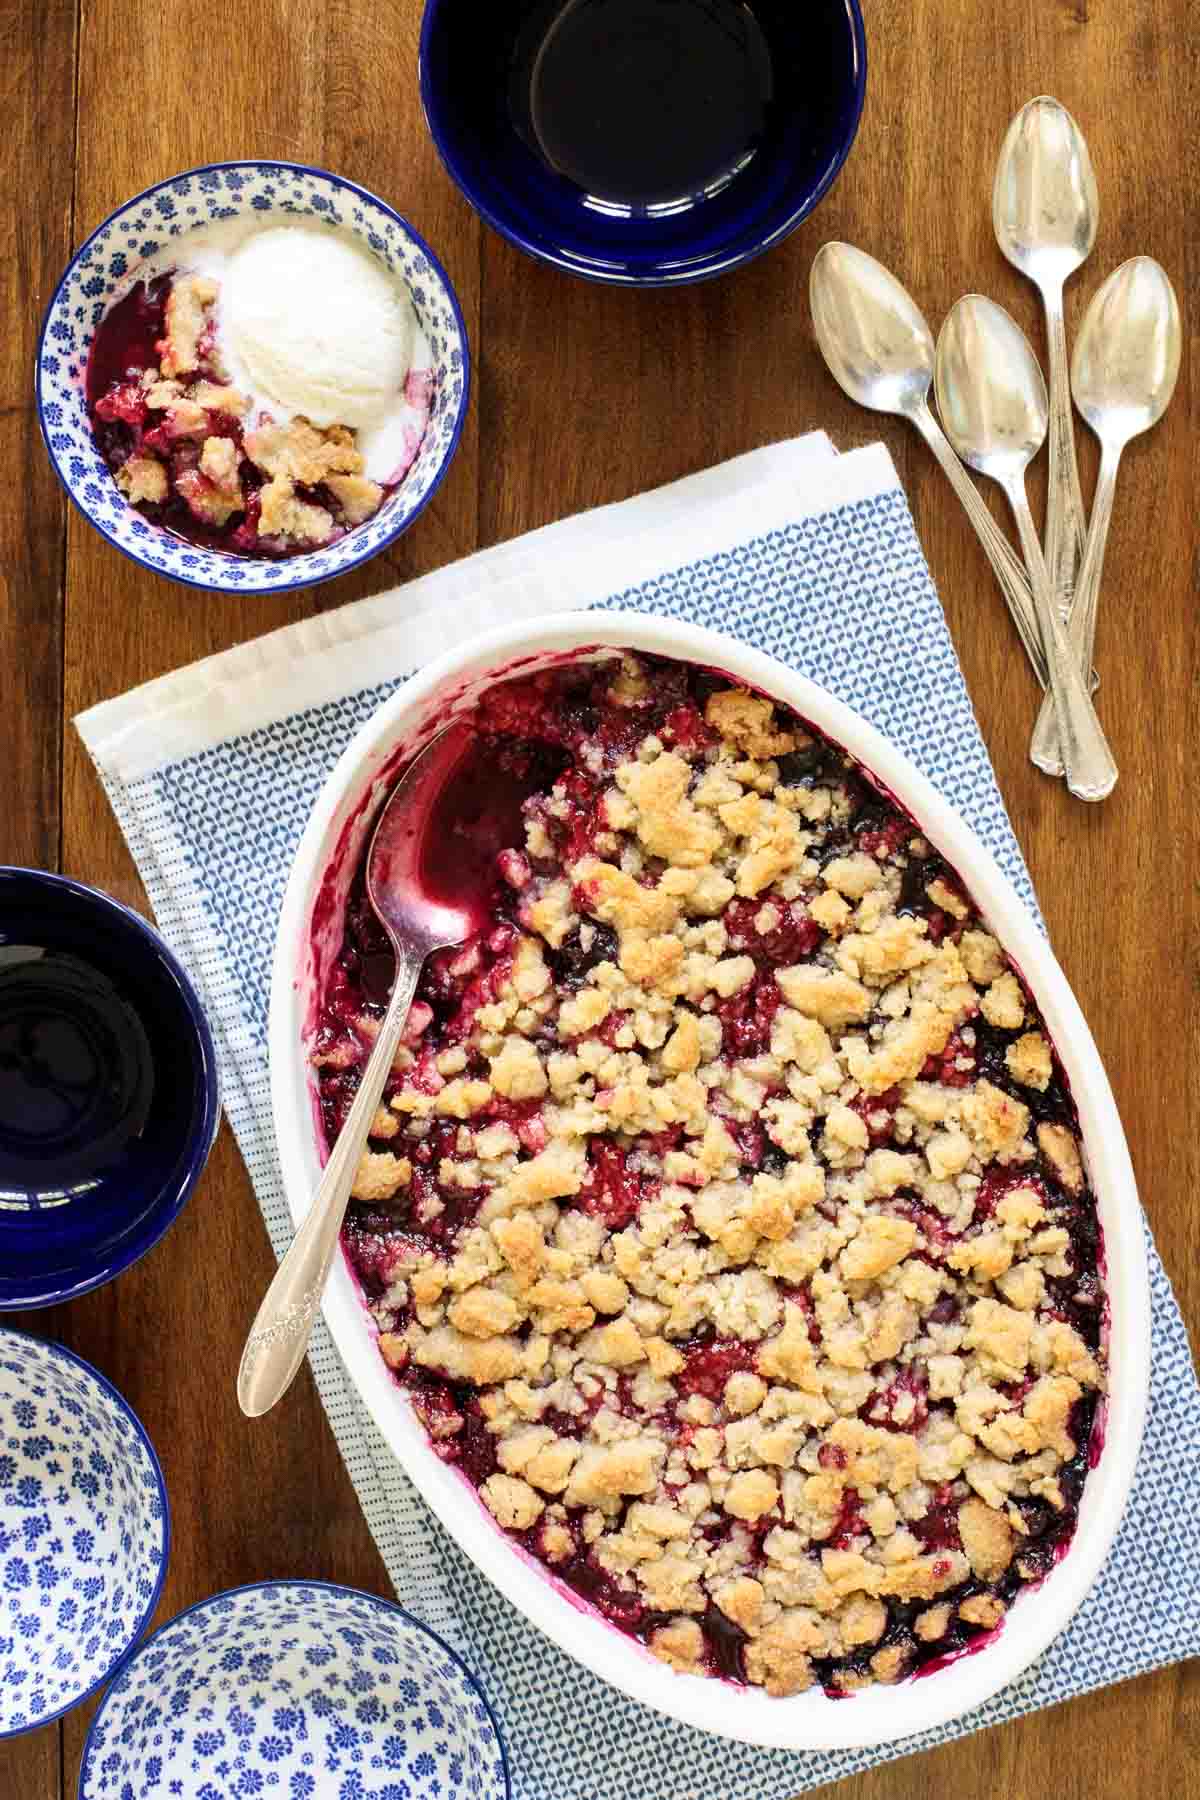 Overhead vertical photo of a Ridiculously Easy Summer Berry Crisp with serving utensils and cups on a wooden table.